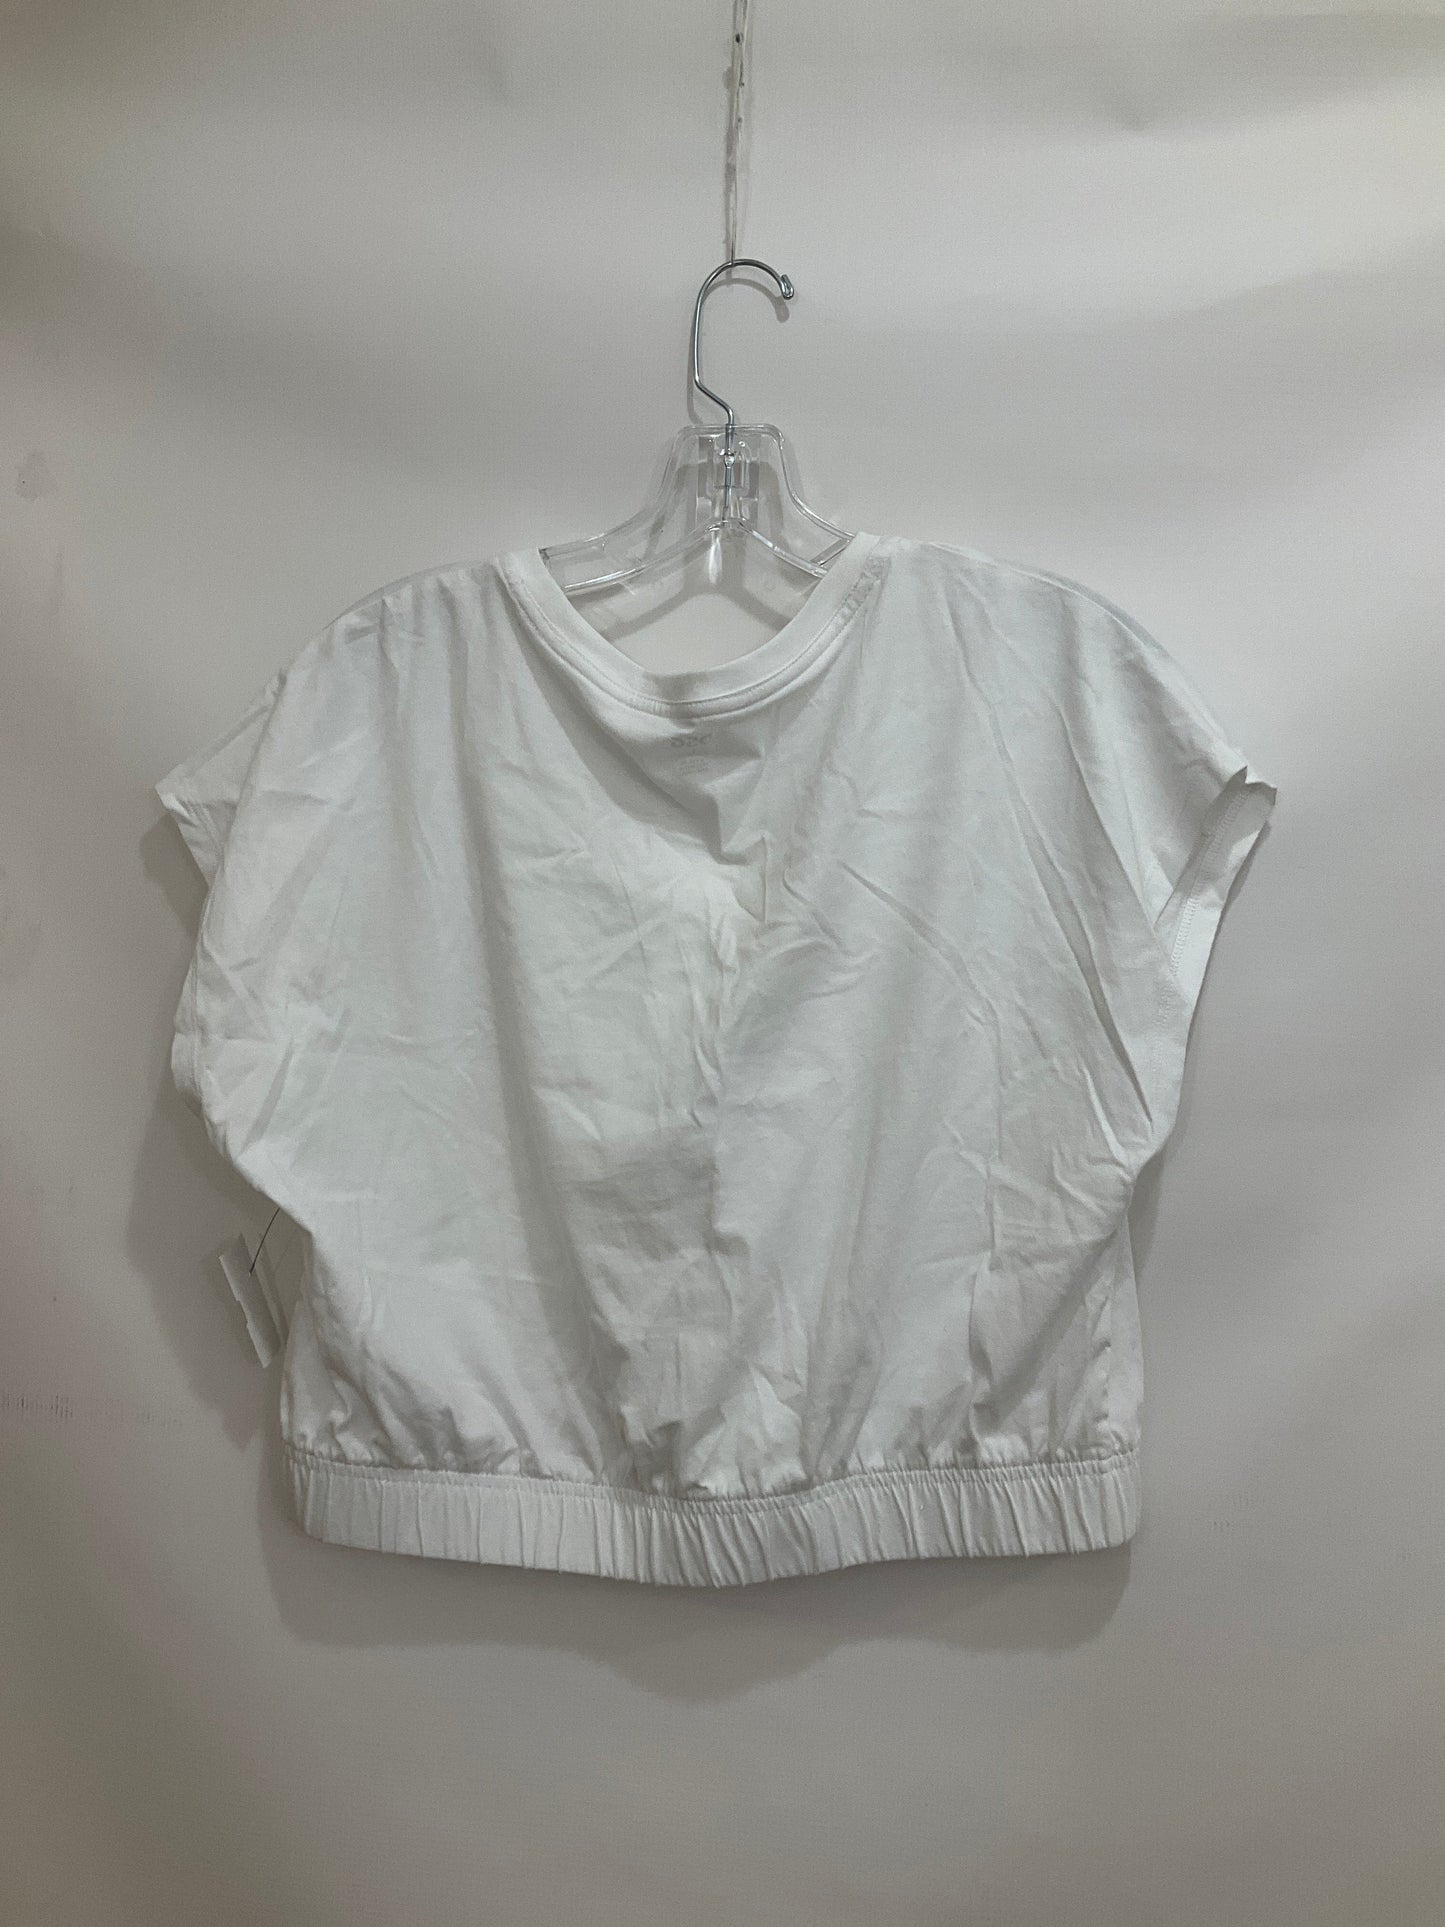 White Athletic Top Short Sleeve Dsg Outerwear, Size L